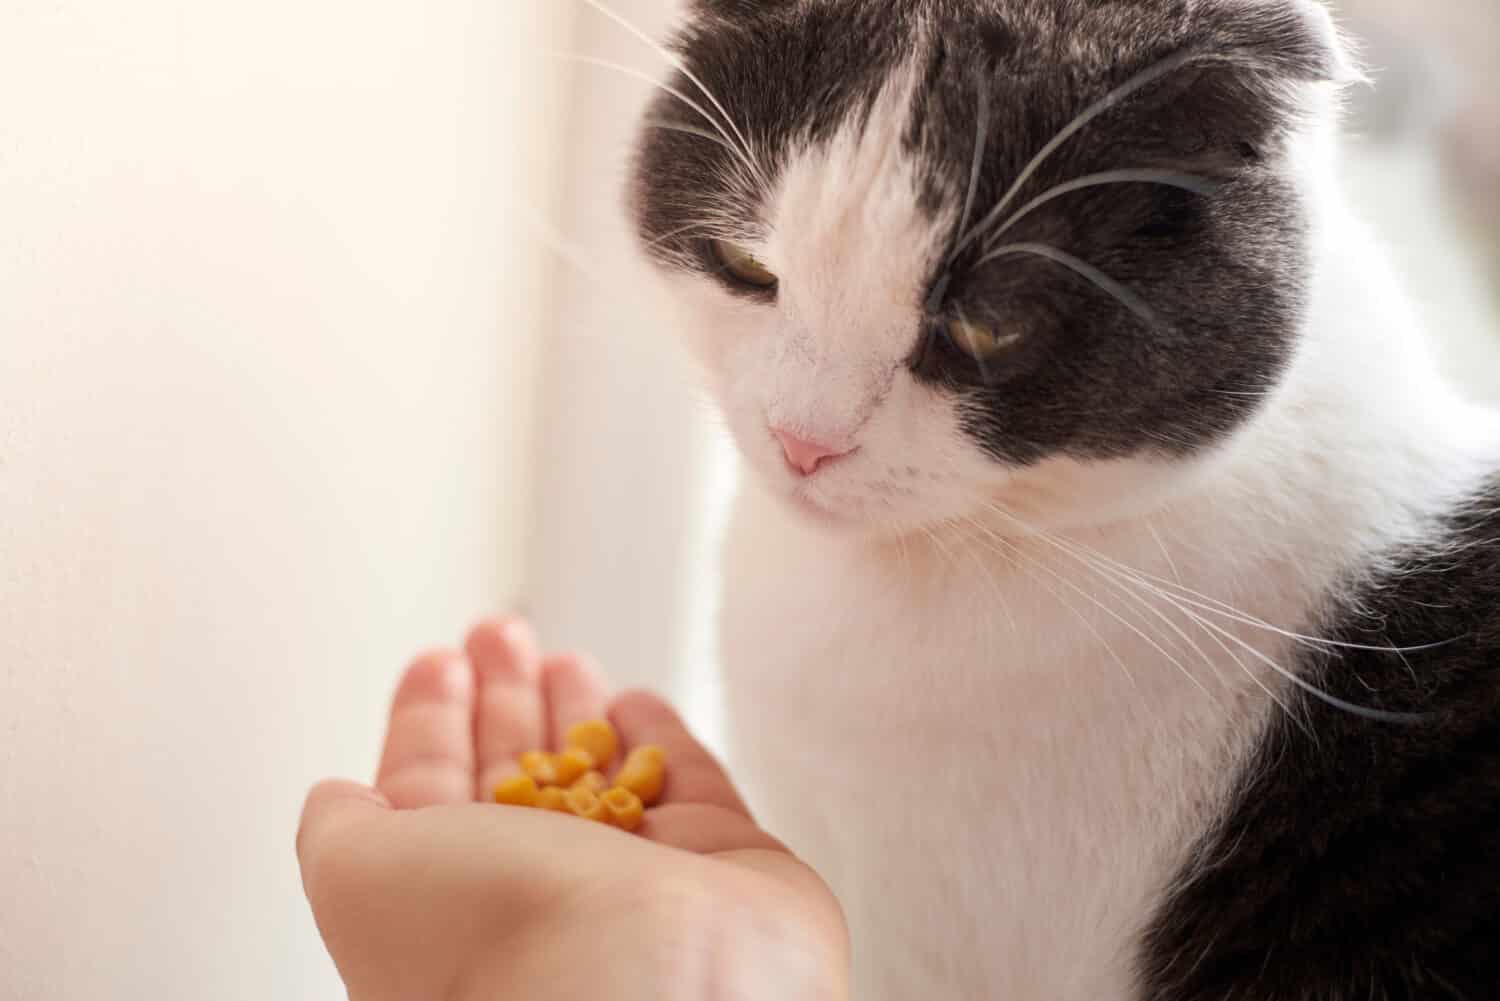 The owner gives his cute cat corn in the palm of his hand.